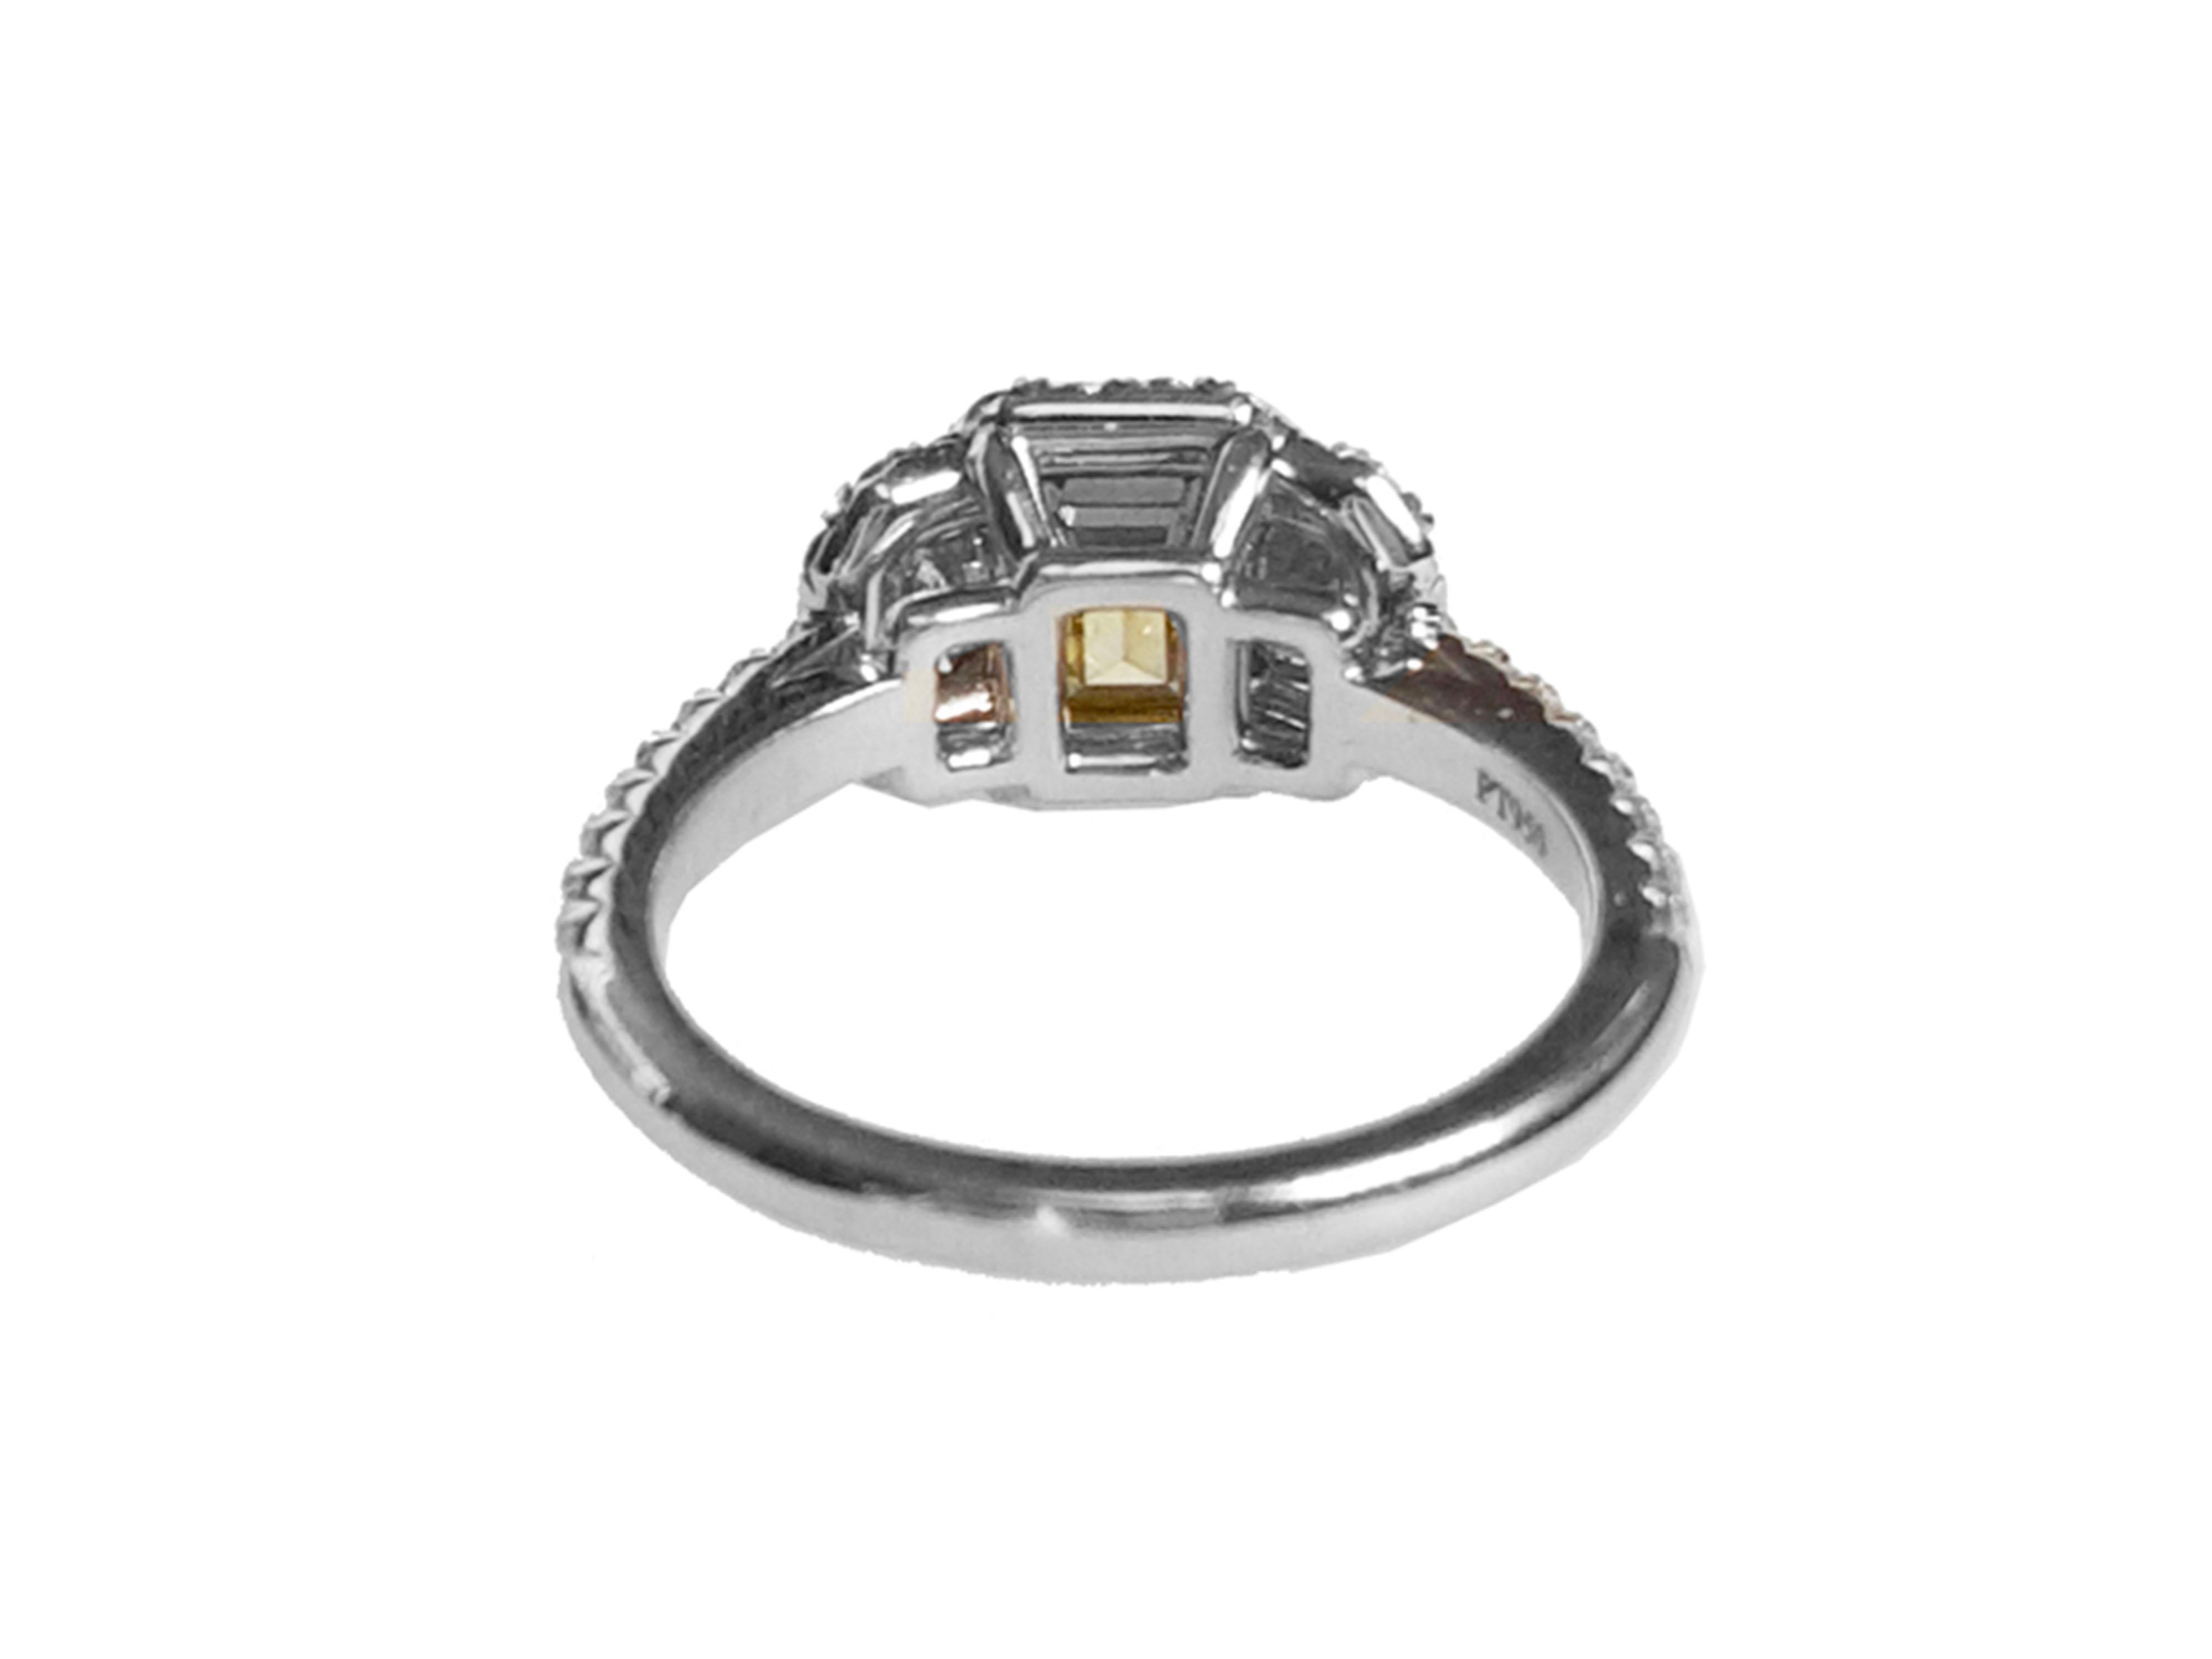 Emerald Cut 1 Carat Fancy Intense Yellow Diamond Engagement 3 Stones Ring, GIA Certified For Sale